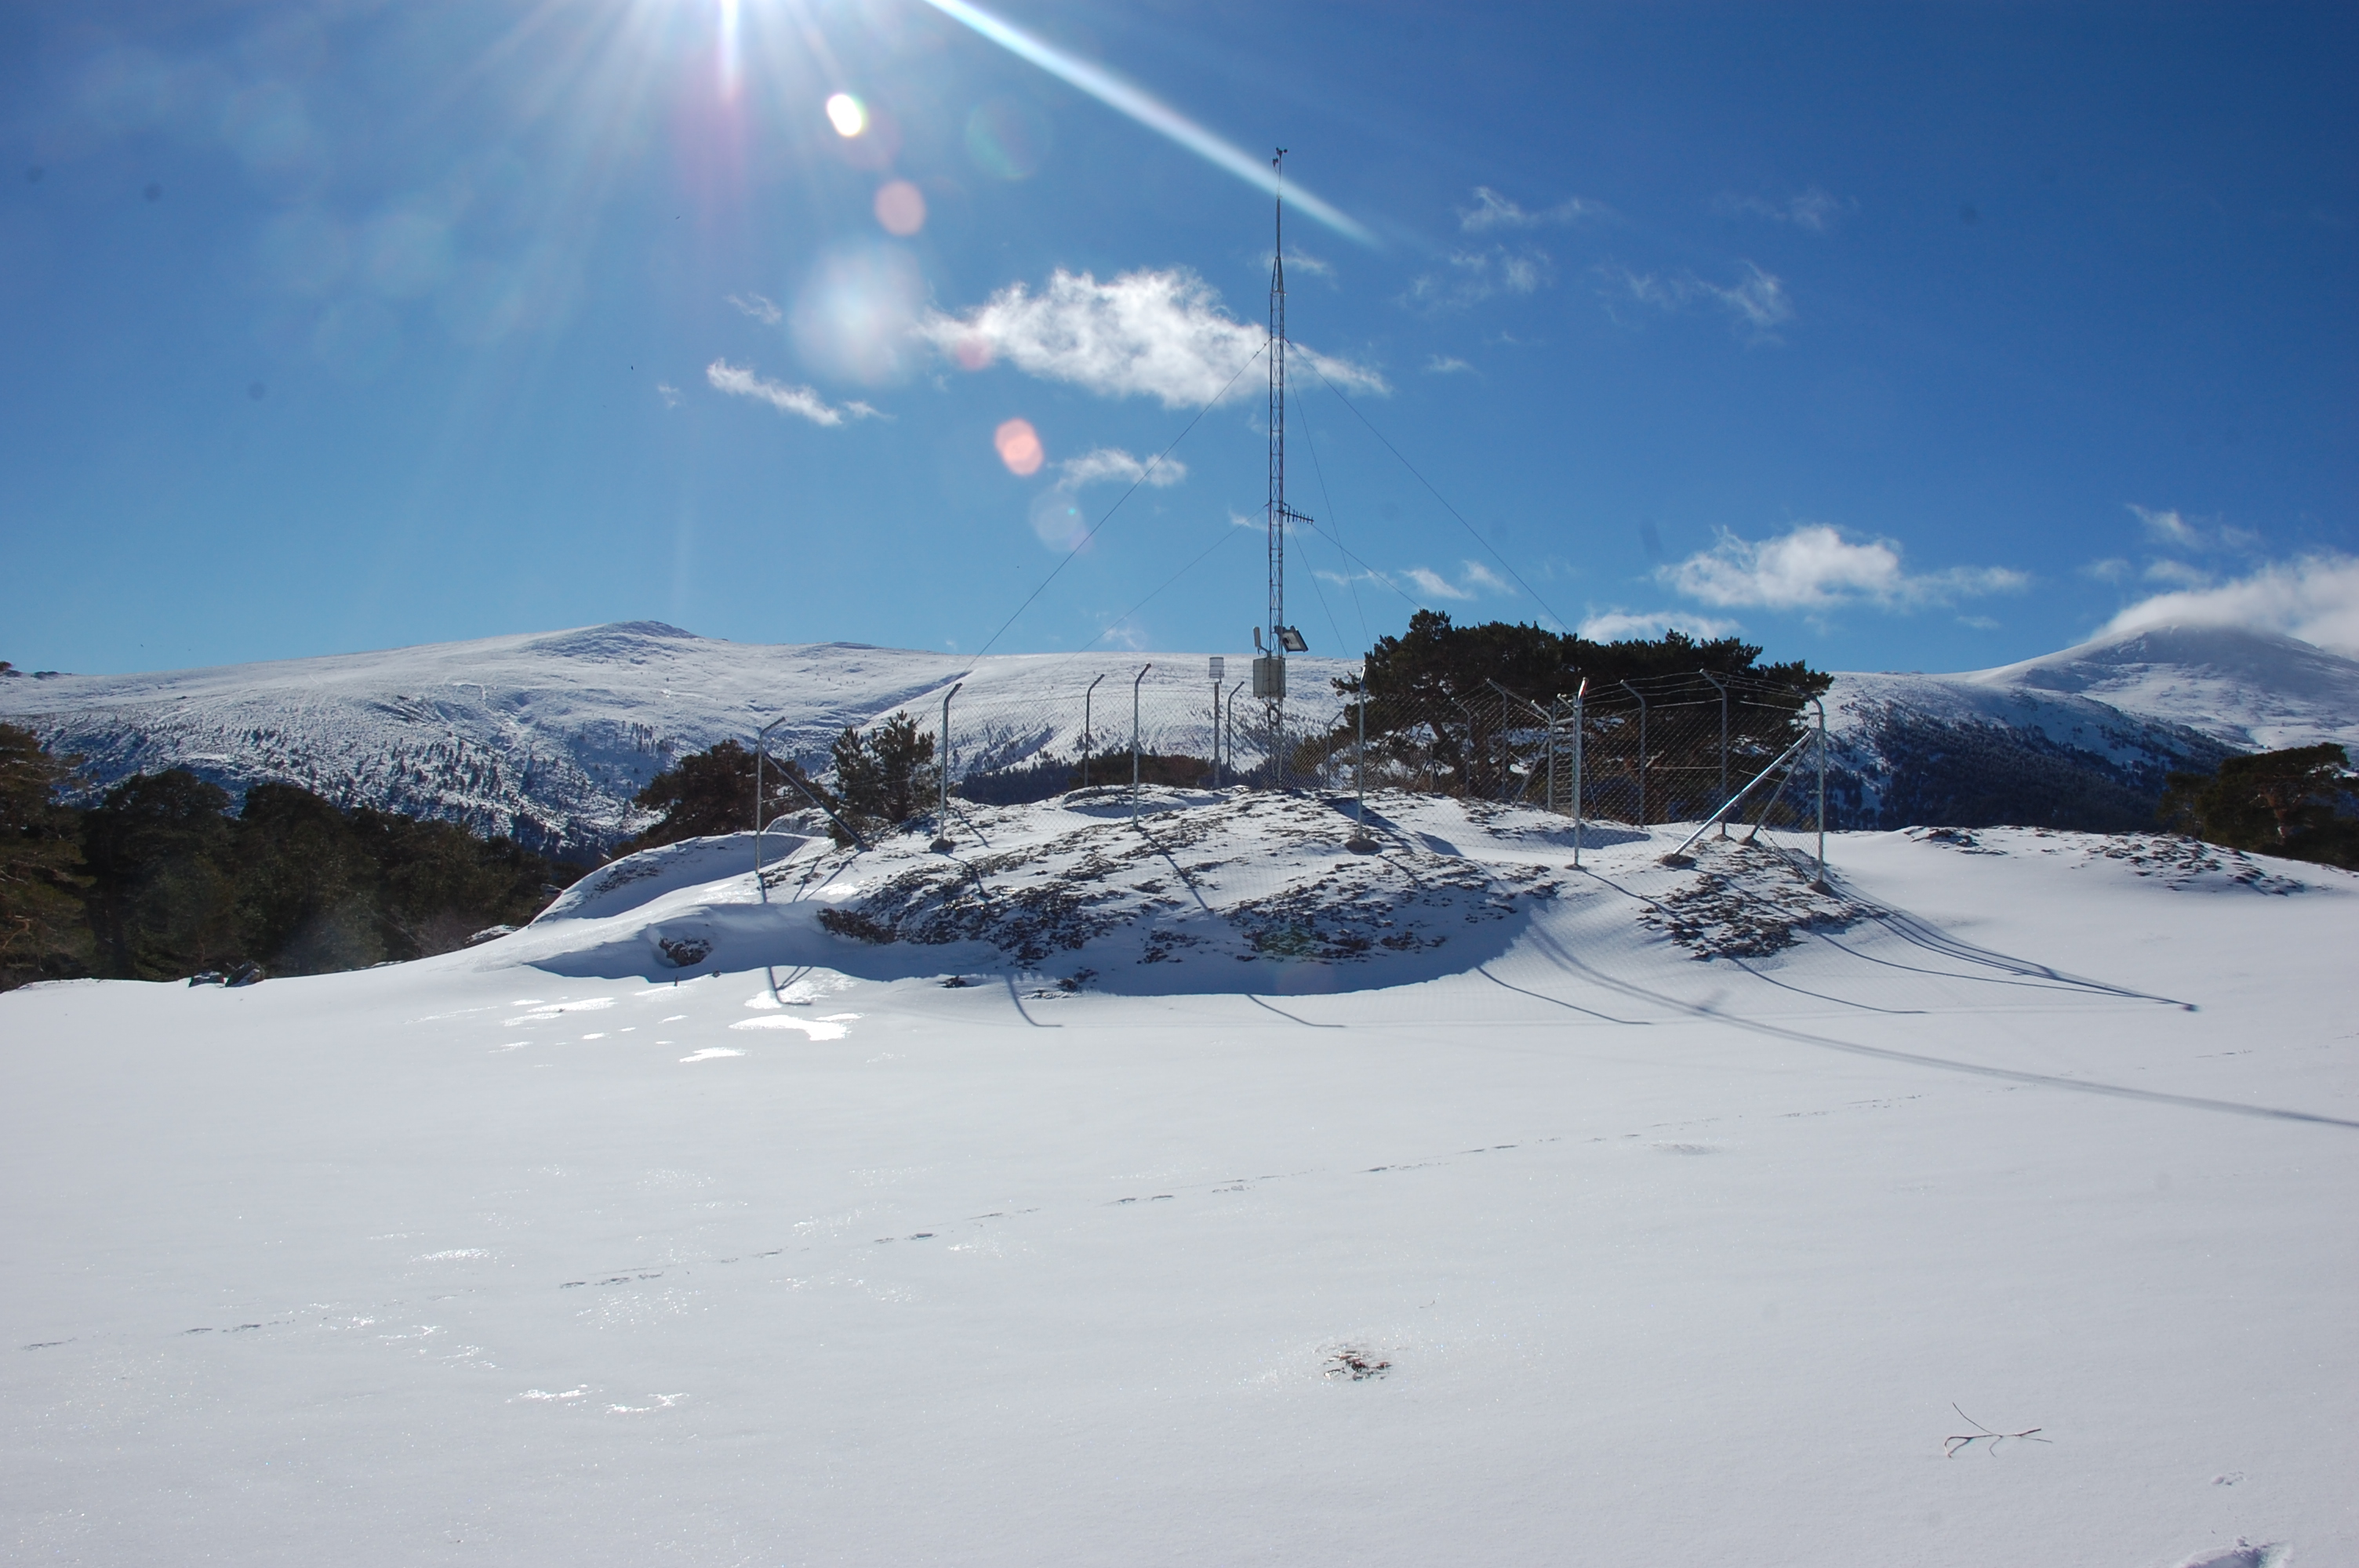 GuMNet: An atmospheric and ground observational network in the Guadarrama Mountains